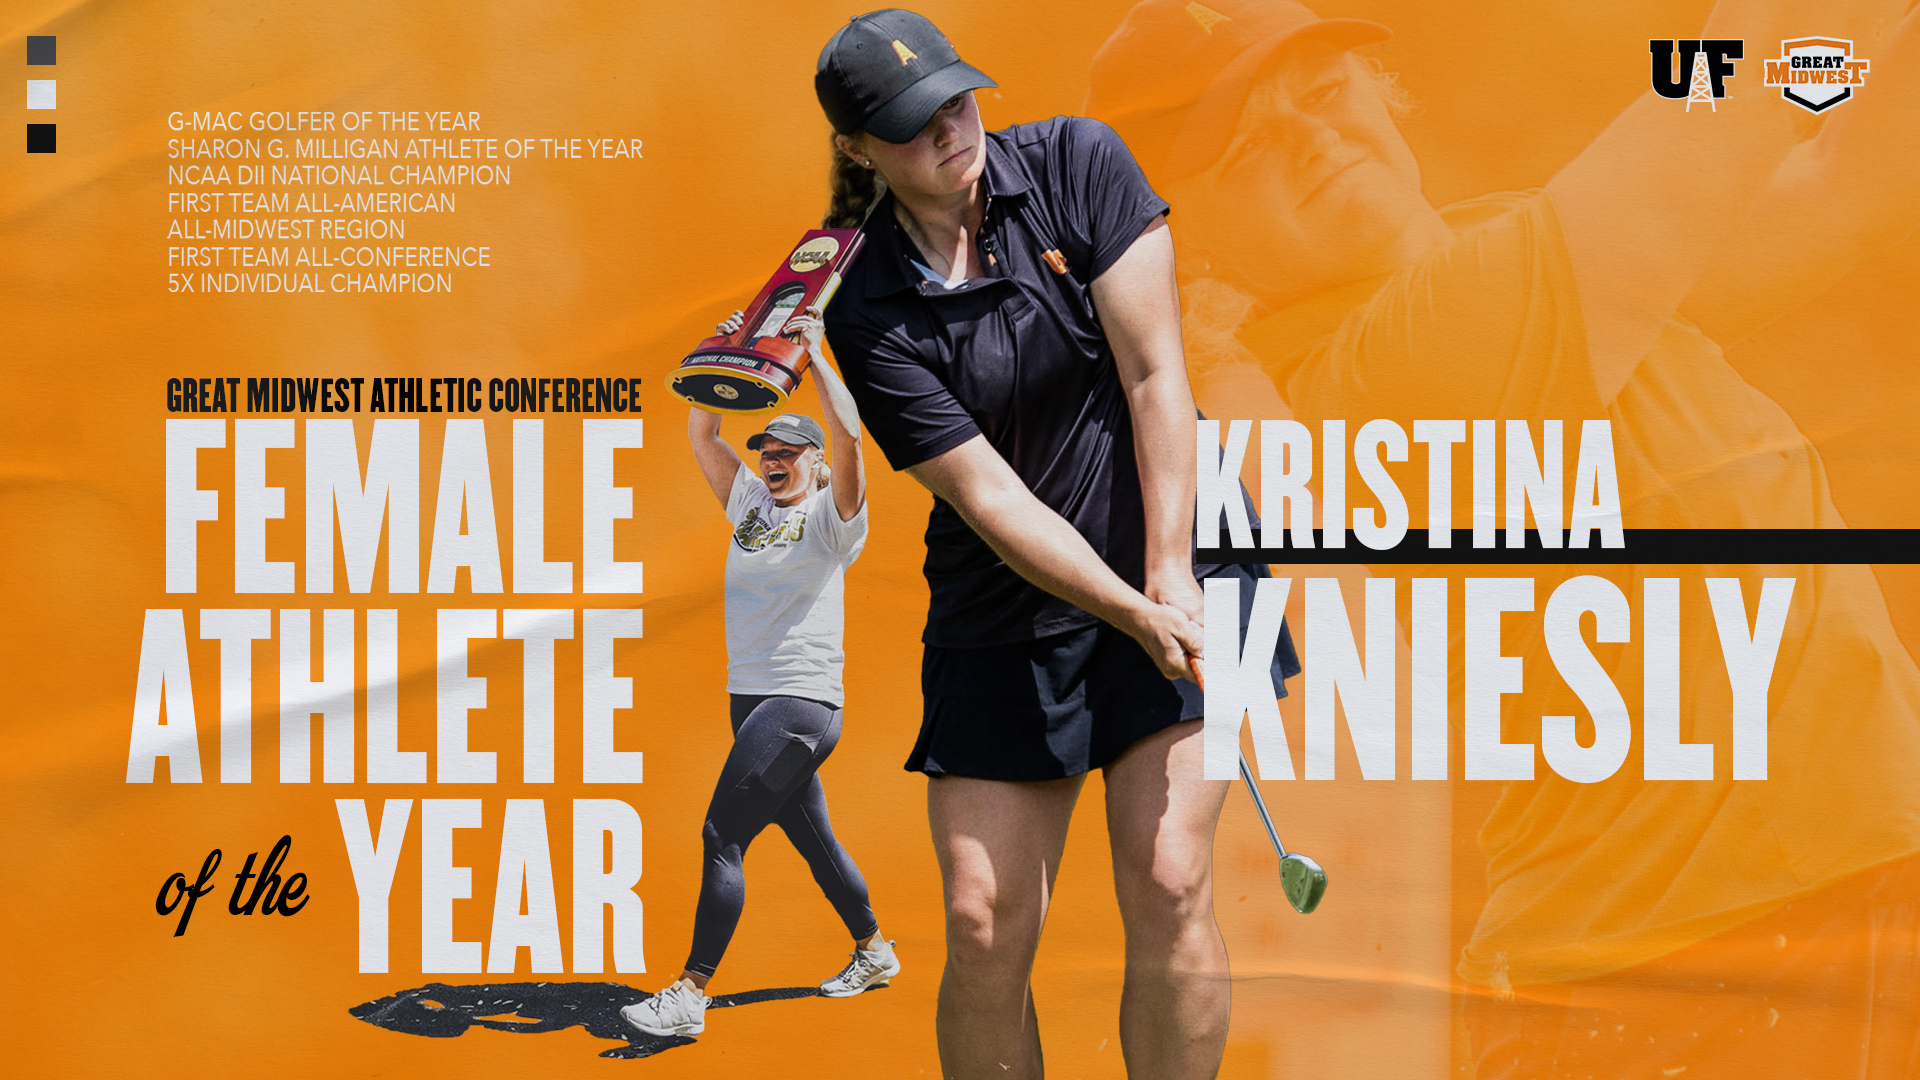 Kristina Kniesly Earns 2021-22 G-MAC Female Athlete of the Year